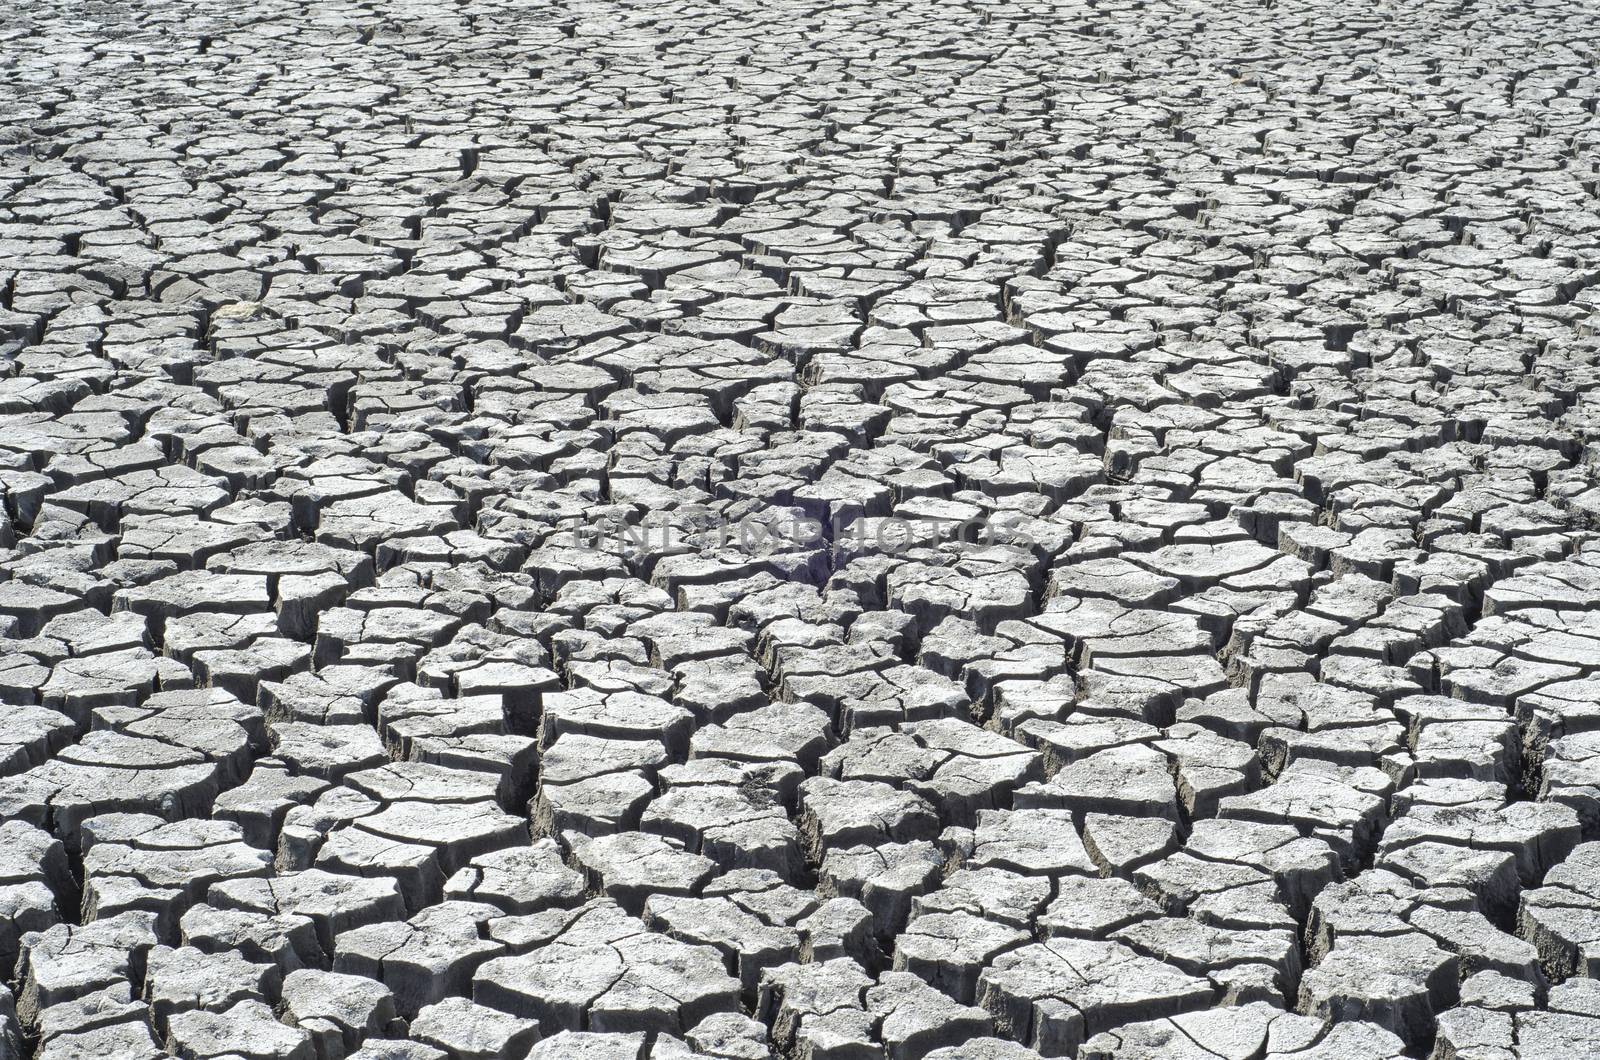 cracked surface of desert as background